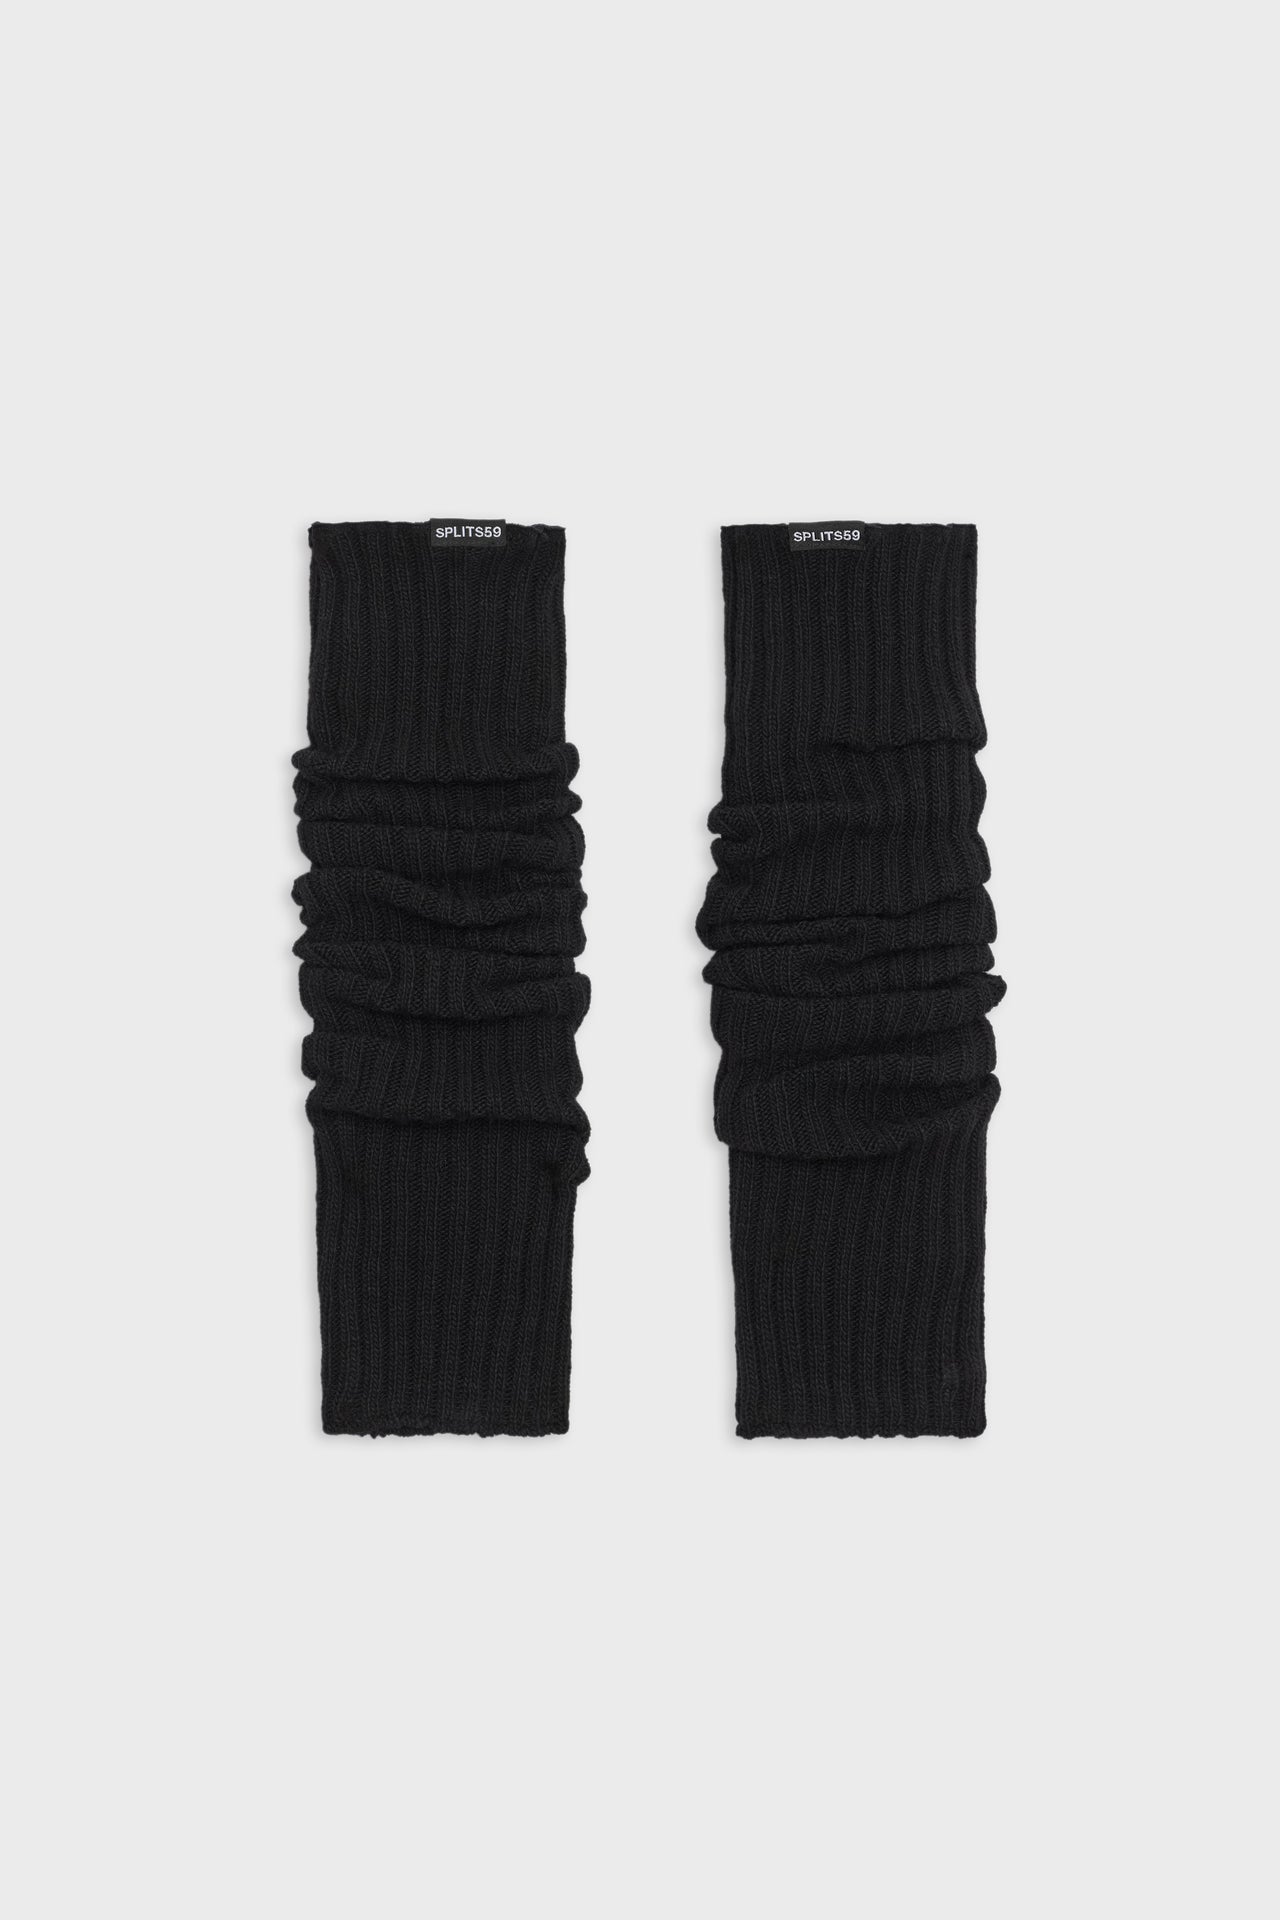 A pair of SPLITS59 black leg warmers on a white background.